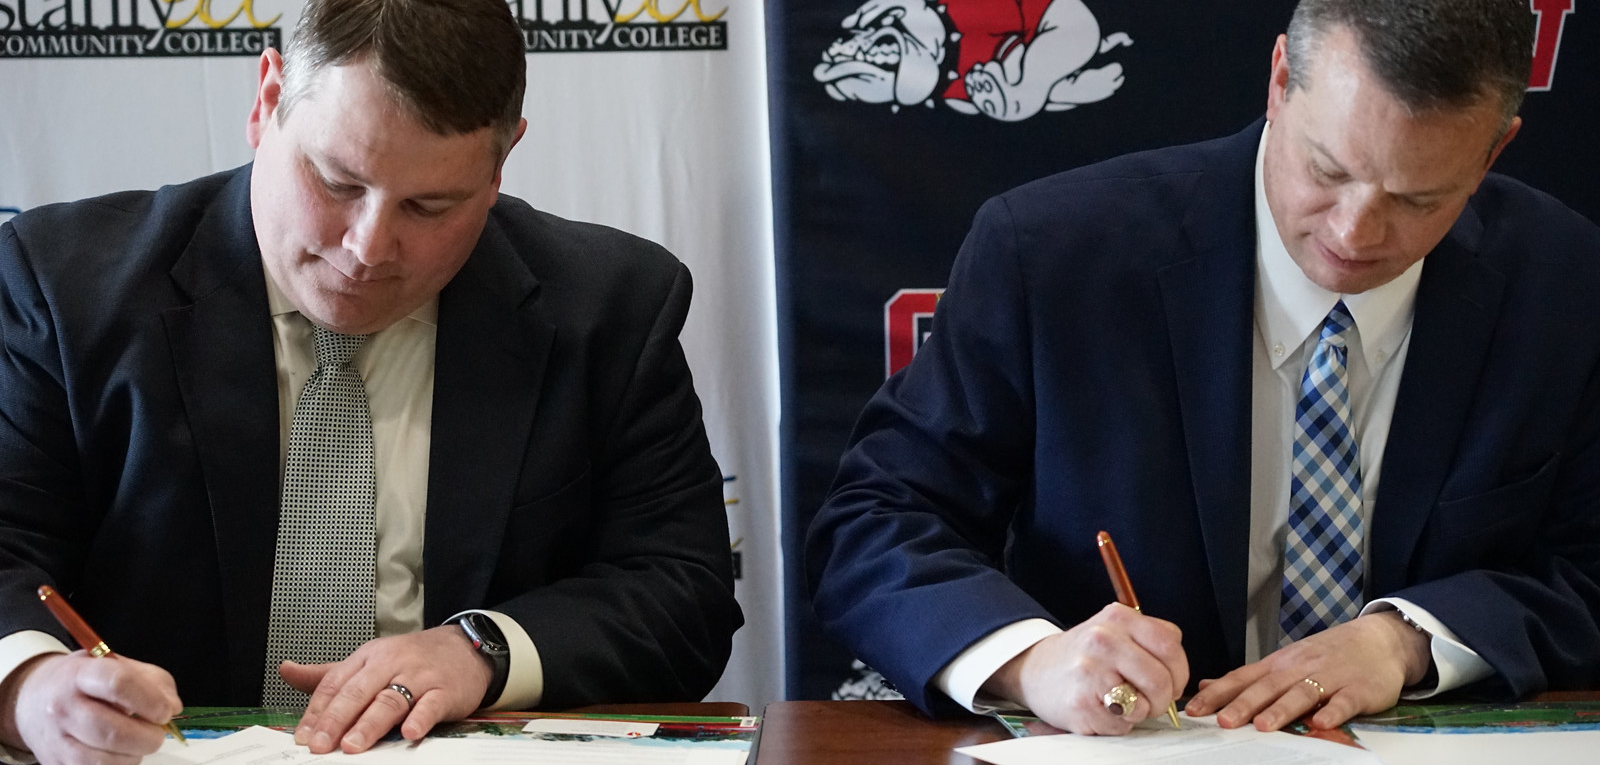 Dr. Downs and John Enamait signing agreement